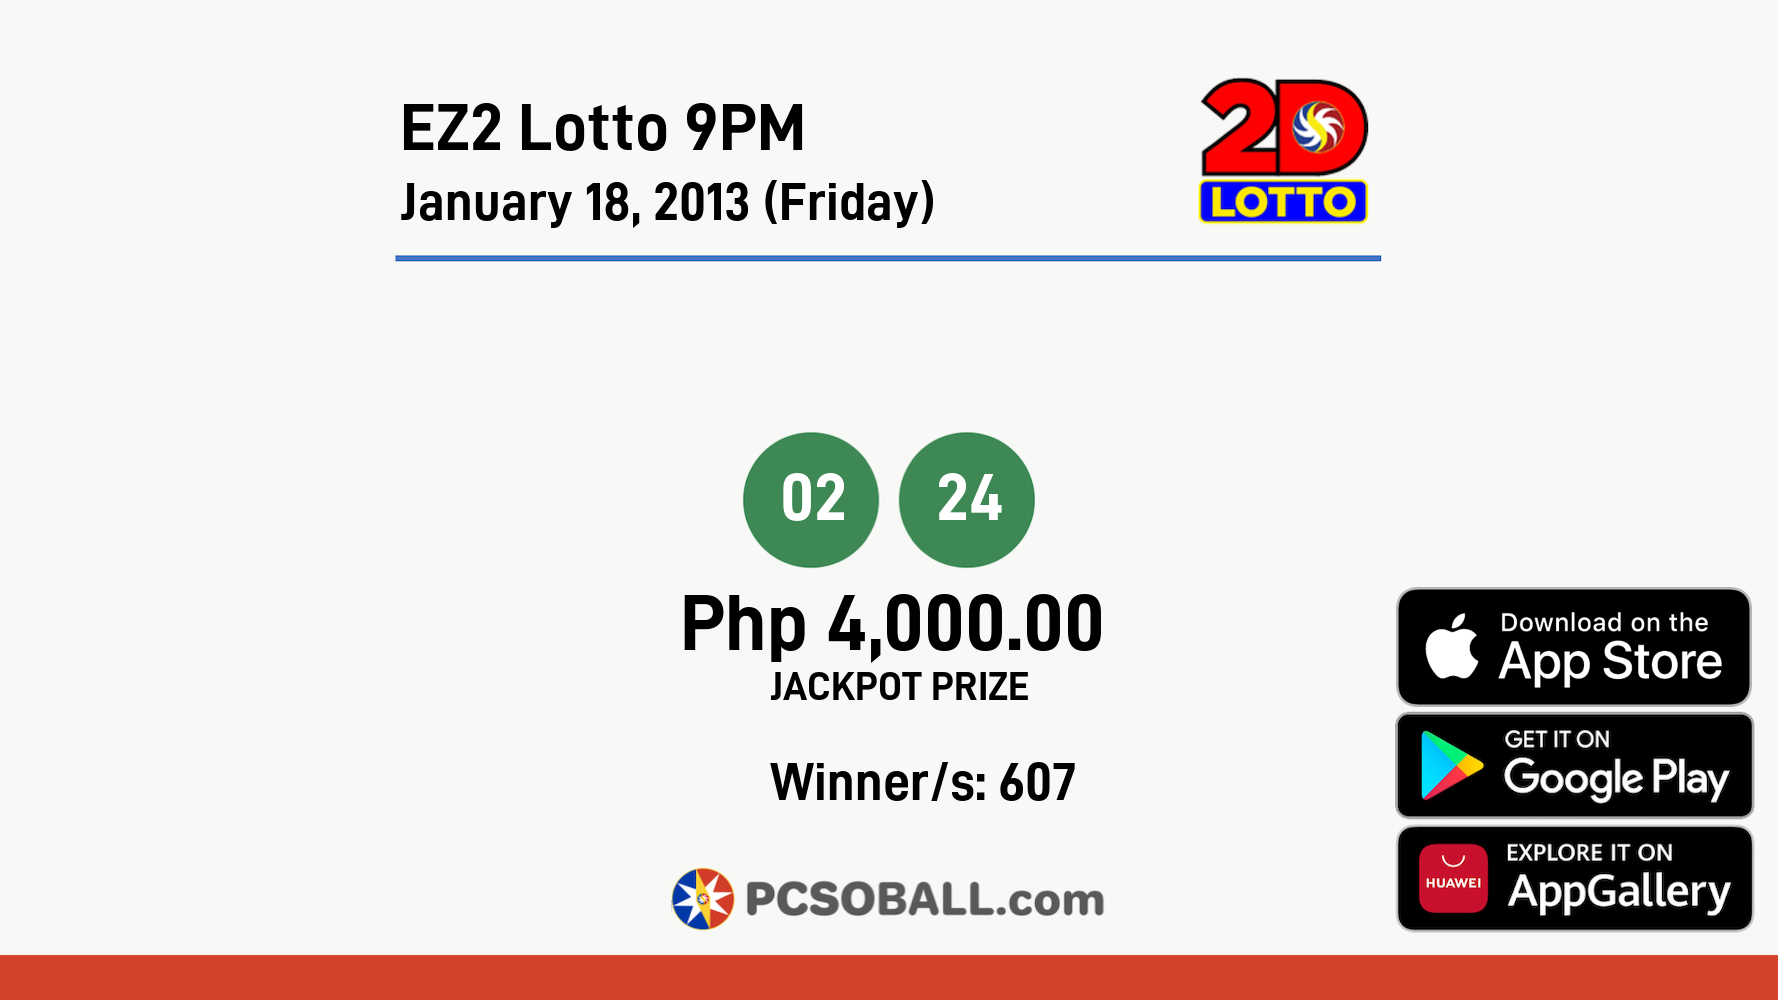 EZ2 Lotto 9PM January 18, 2013 (Friday) Result